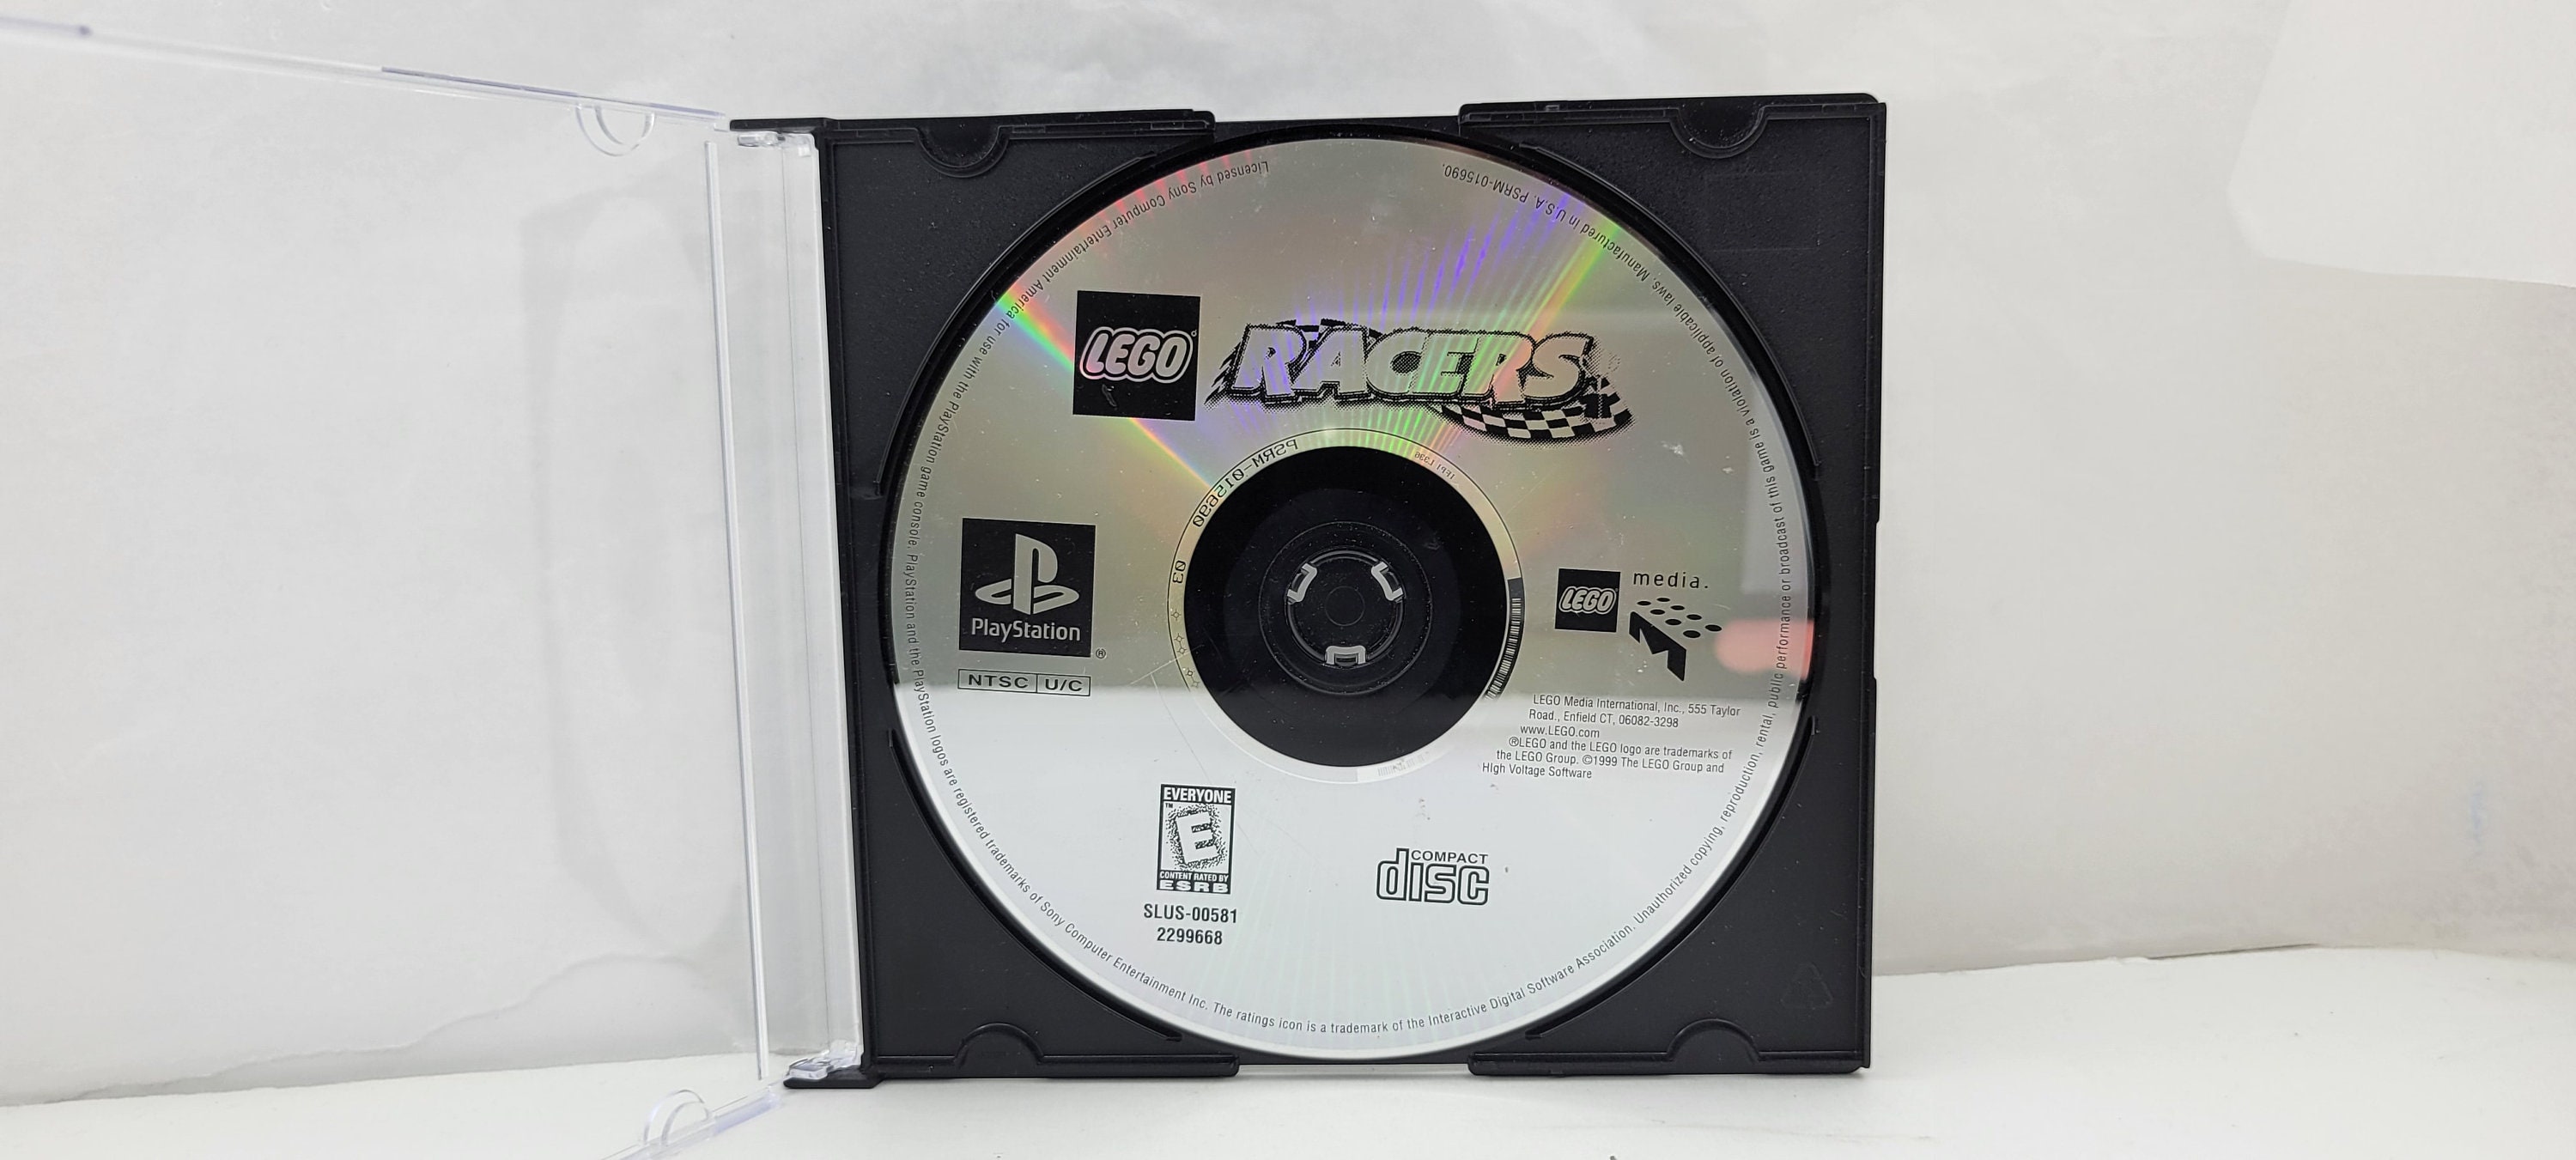 Racers Loose Disc - Etsy